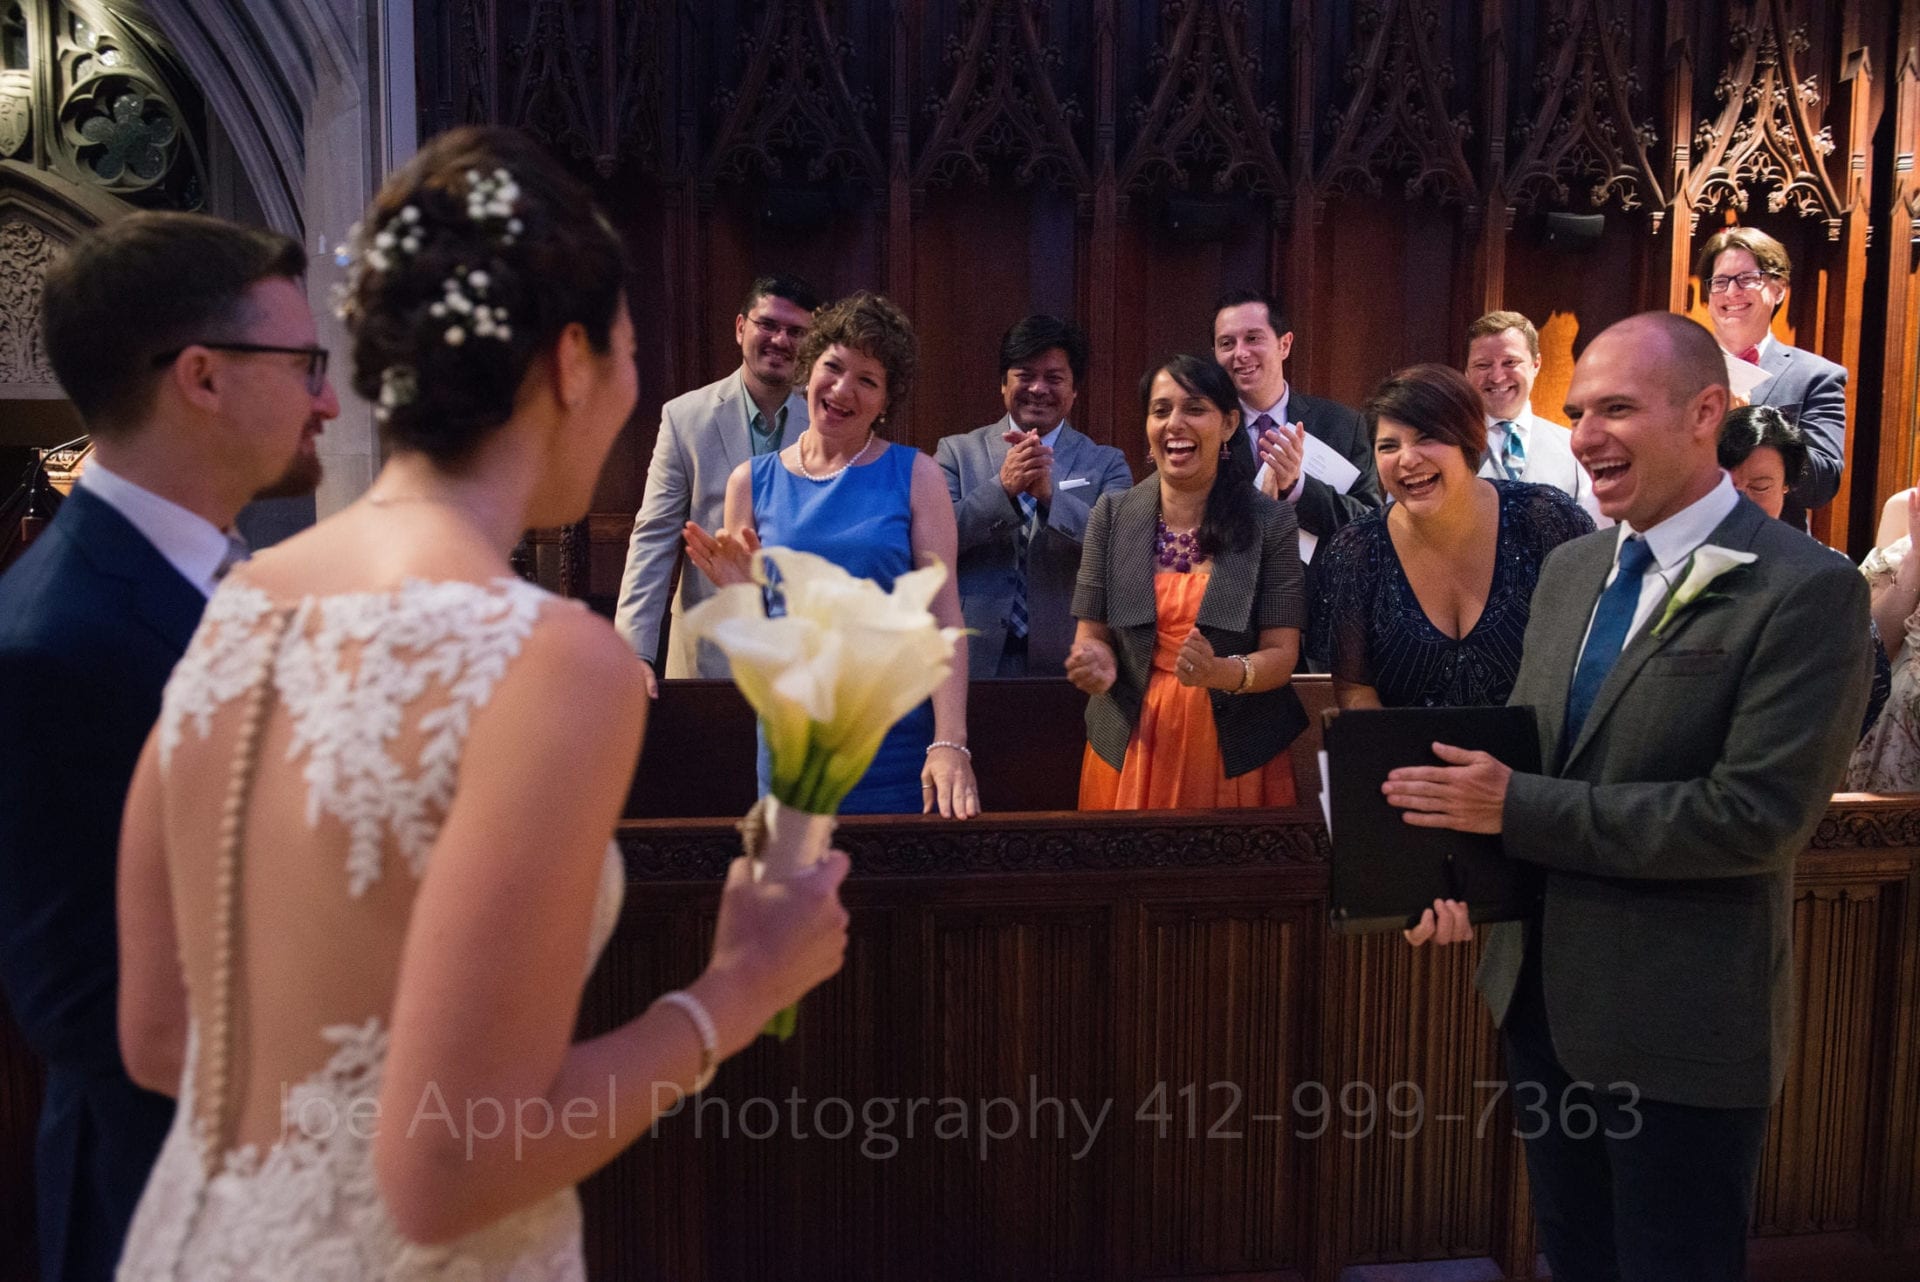 A bride and a groom walk towards a group of people in a choir seated in pews. The choir members smile at the couple who are also happy to see them.